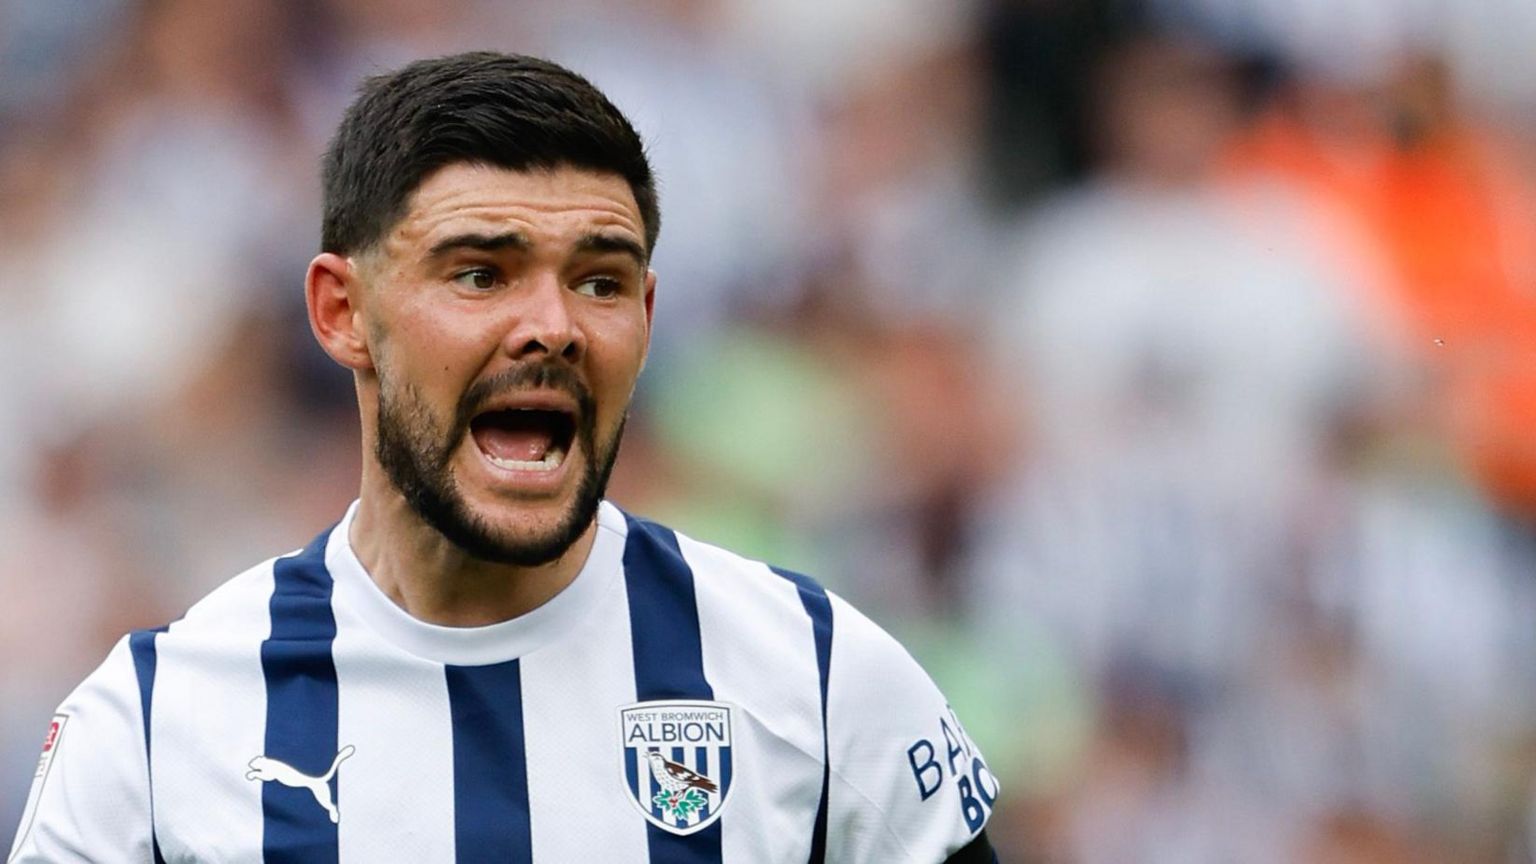 Alex Mowatt in action for West Brom